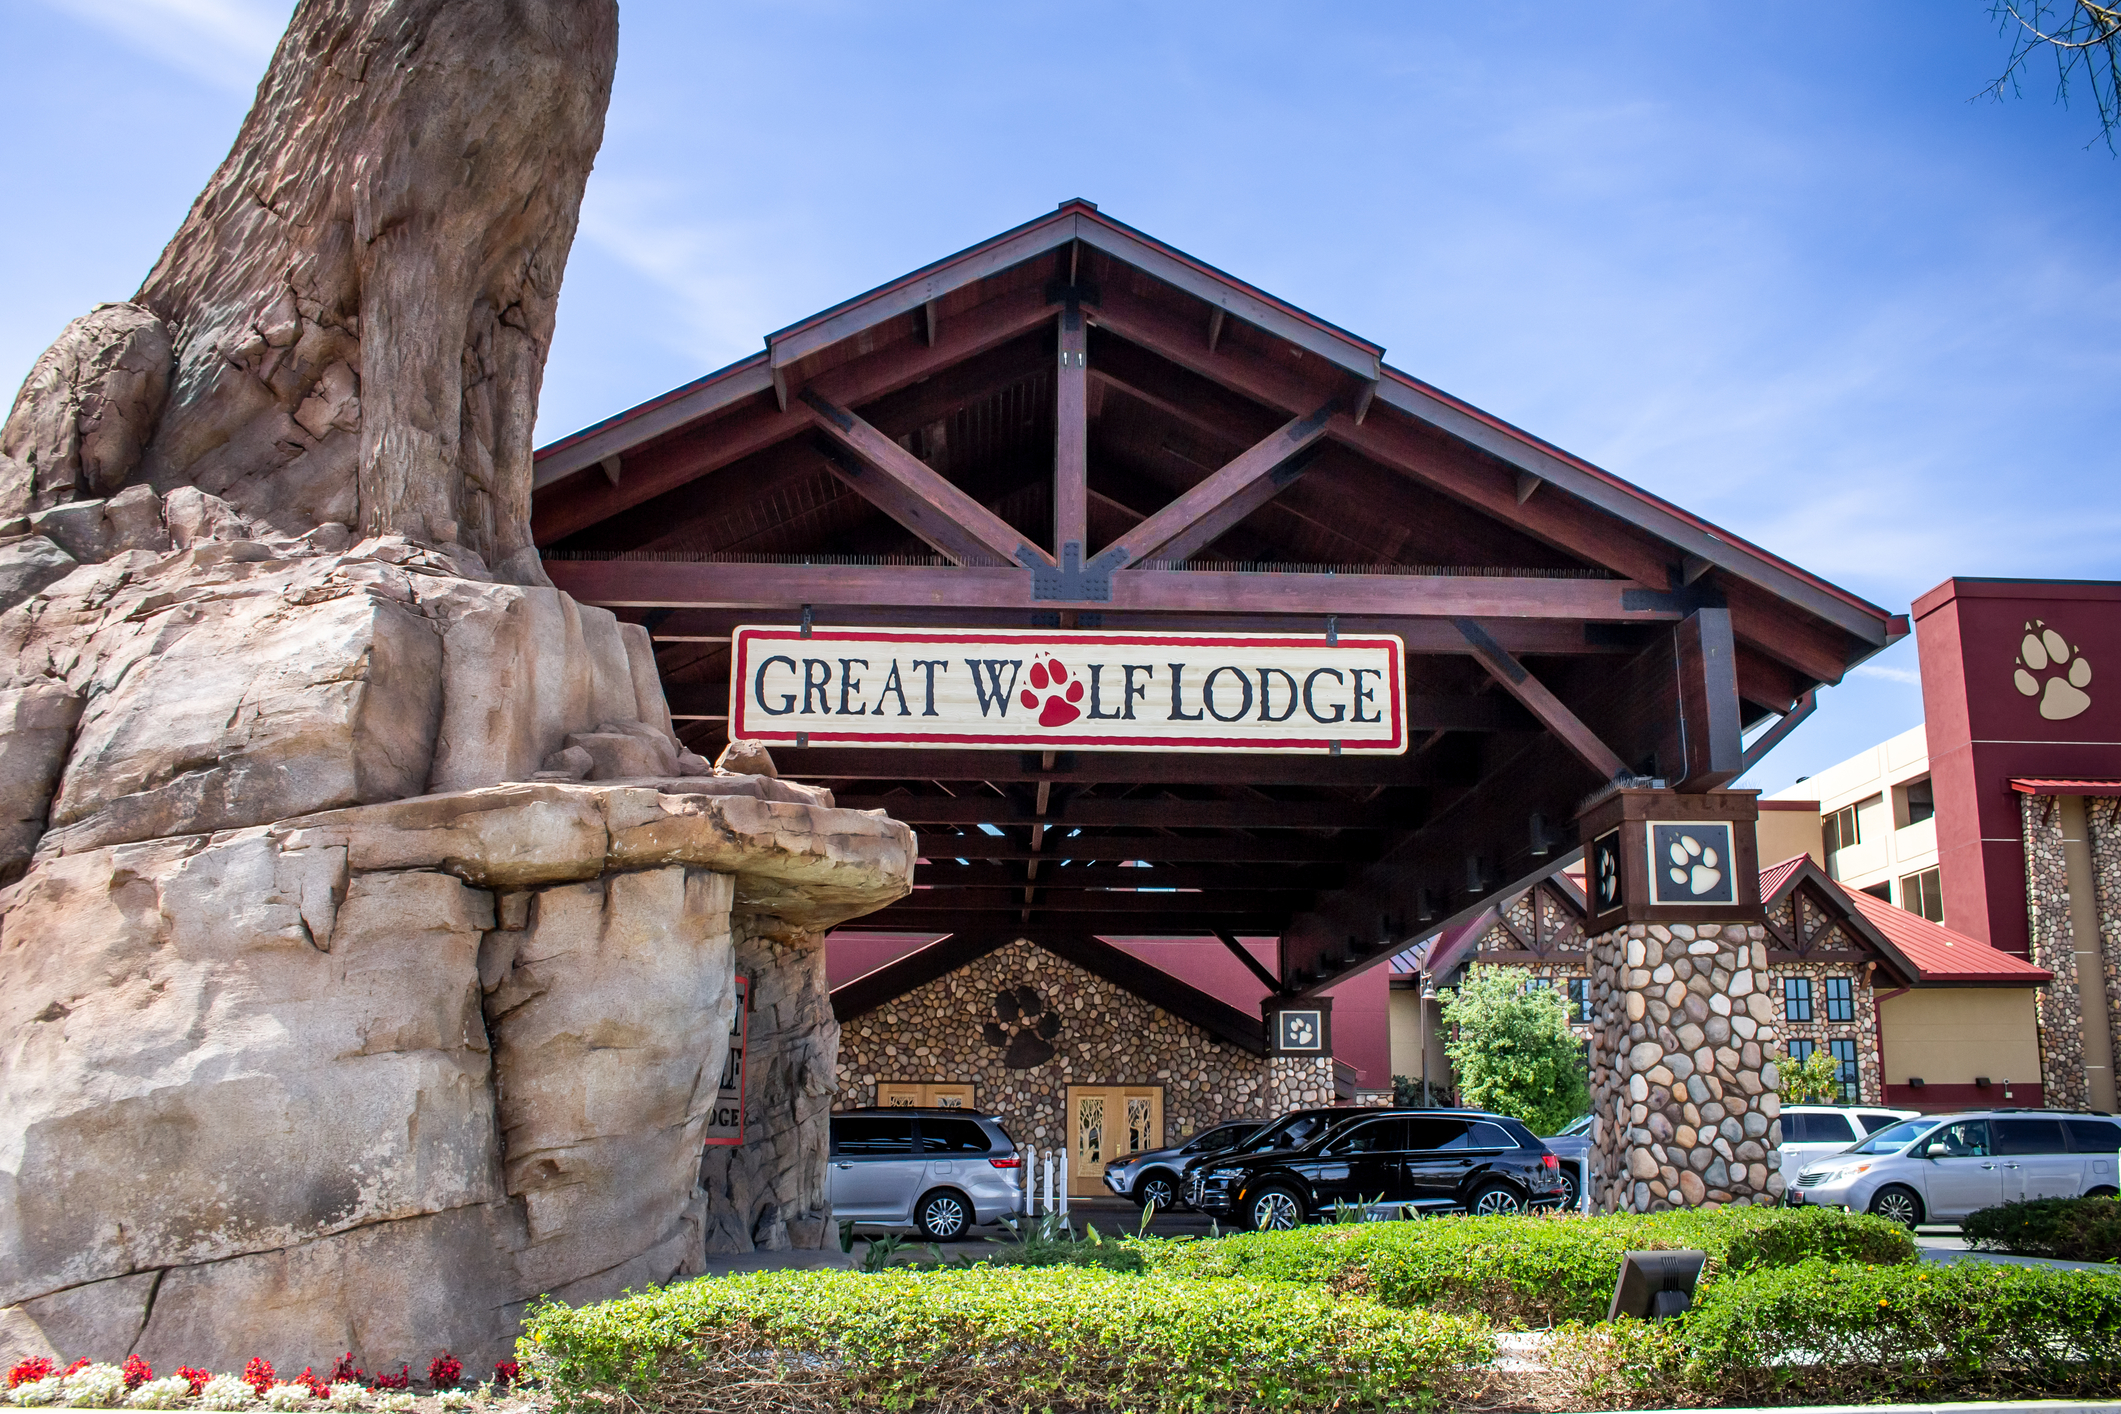 Great Wolf Lodge Leap Year sale: Enjoy stays from $29 per person!